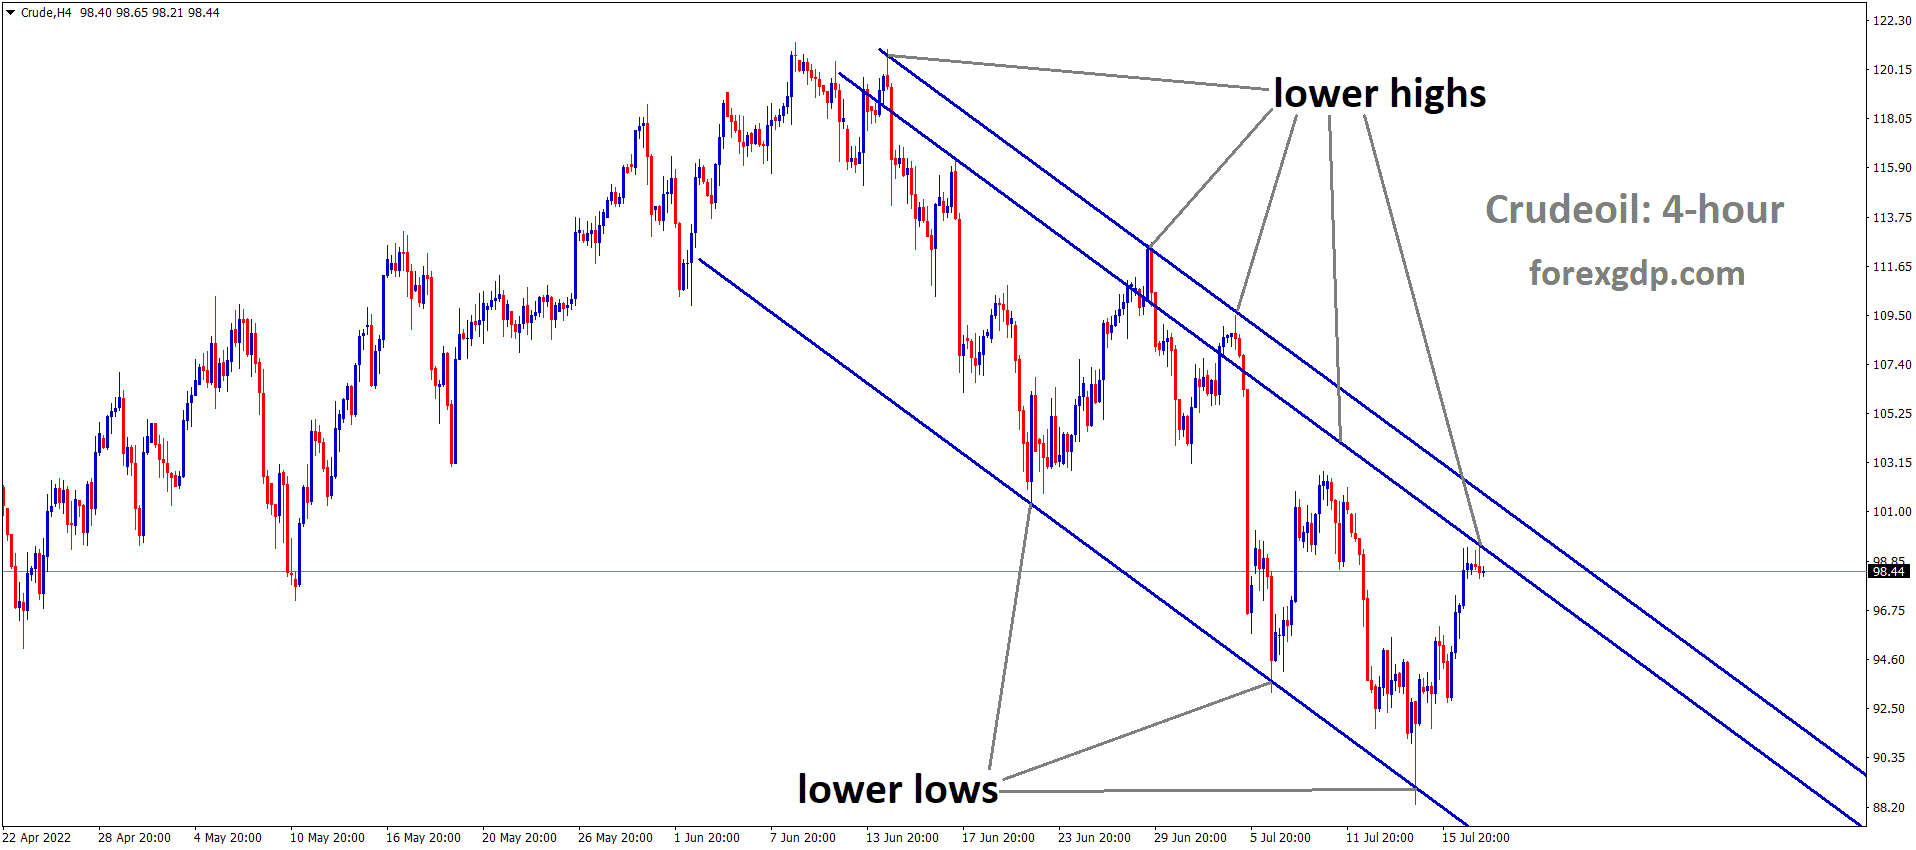 Crude Oil is moving in the Descending channel and the market has reached the Lower high area of the channel